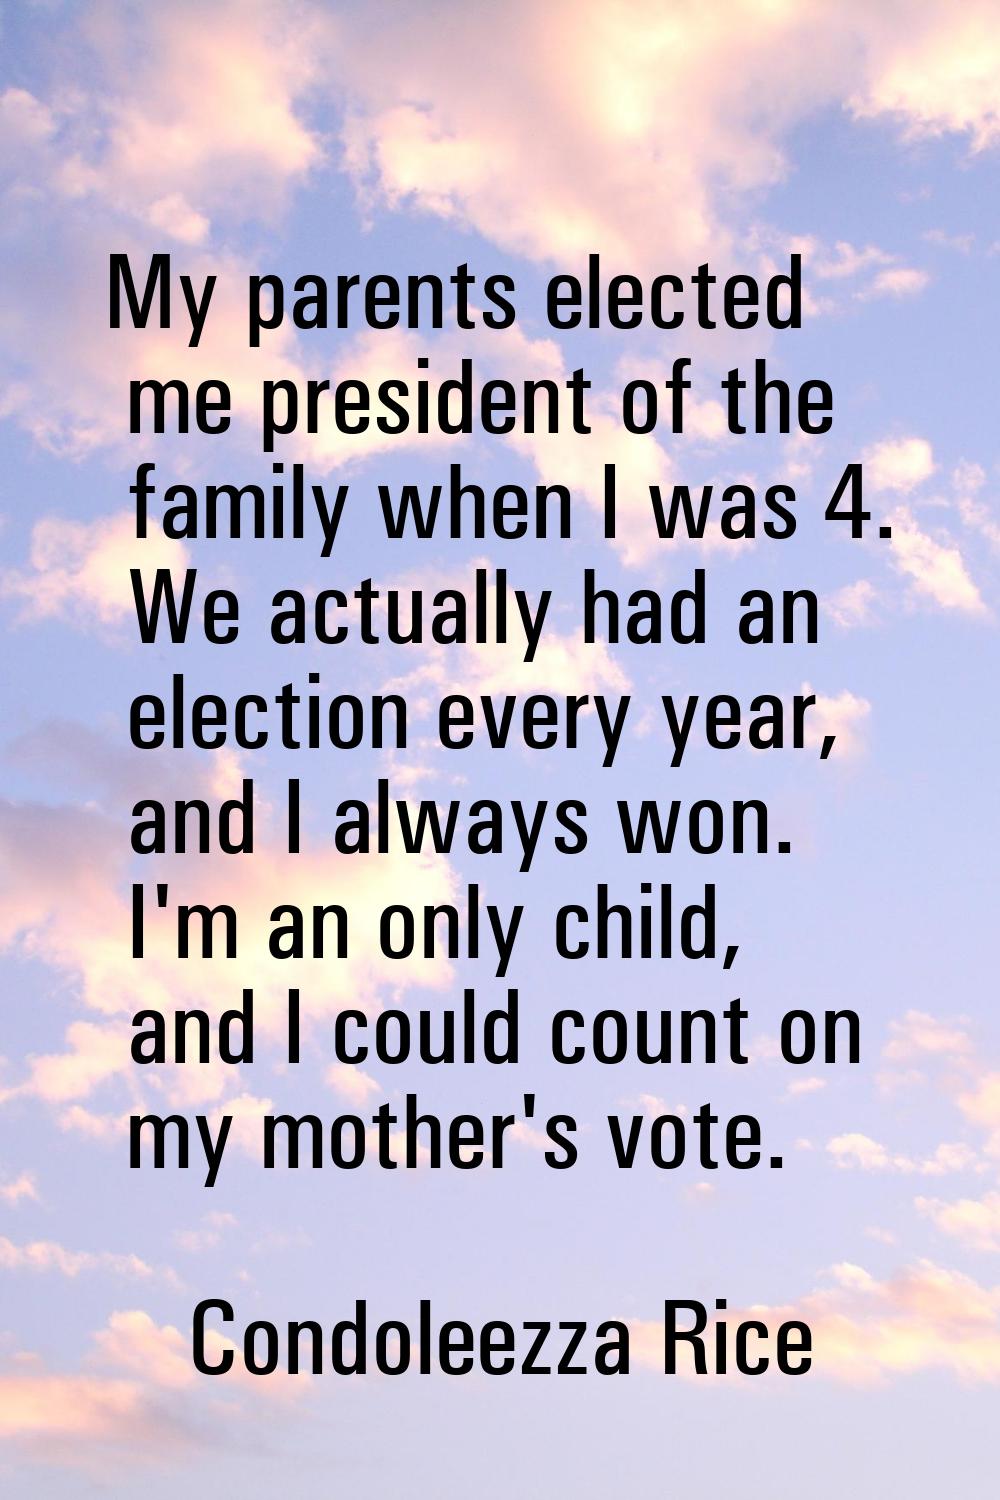 My parents elected me president of the family when I was 4. We actually had an election every year,